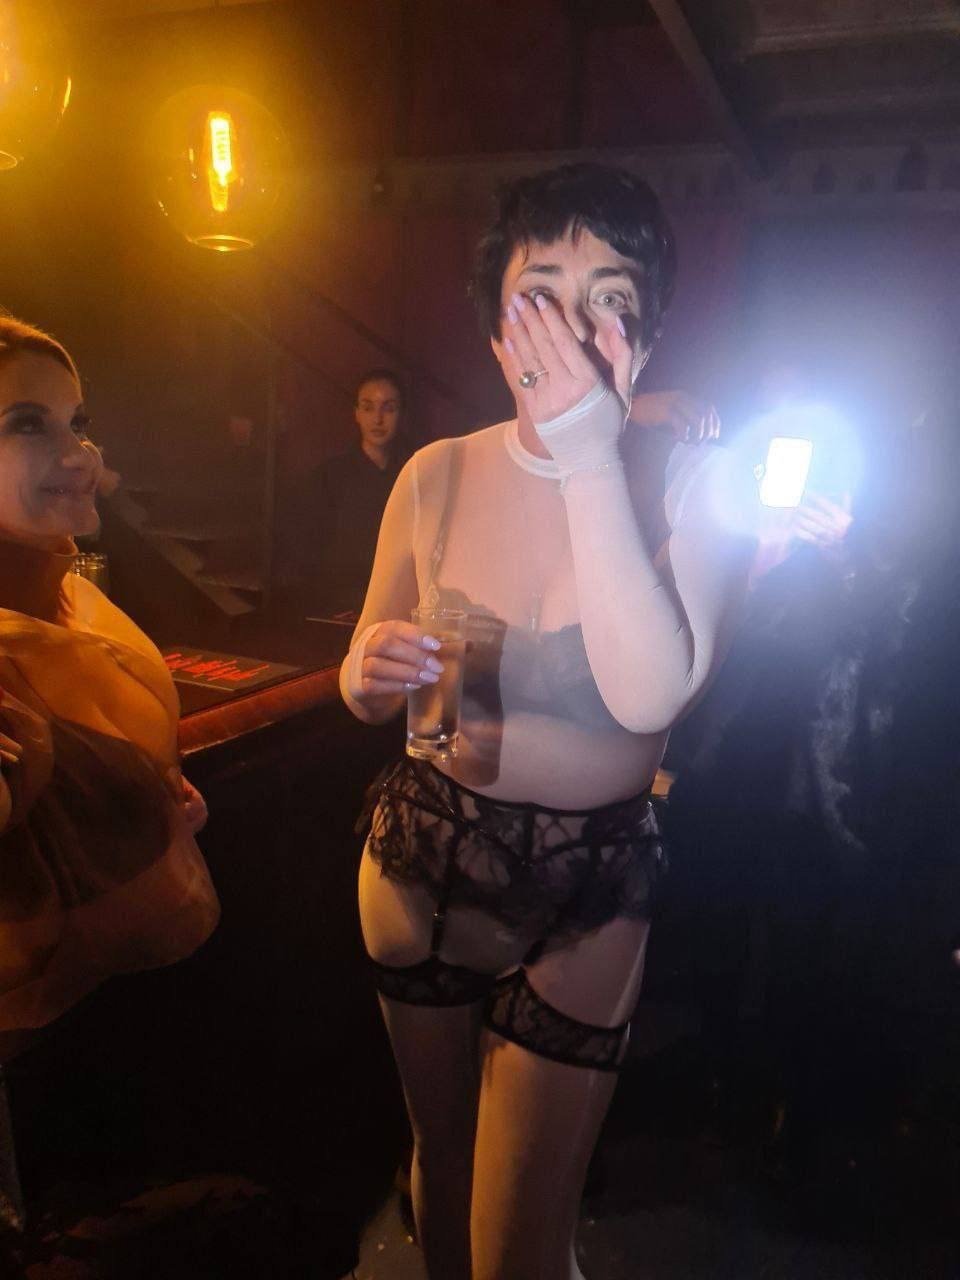 Lolita during the ‘Almost Naked’ party. Photo: Social media